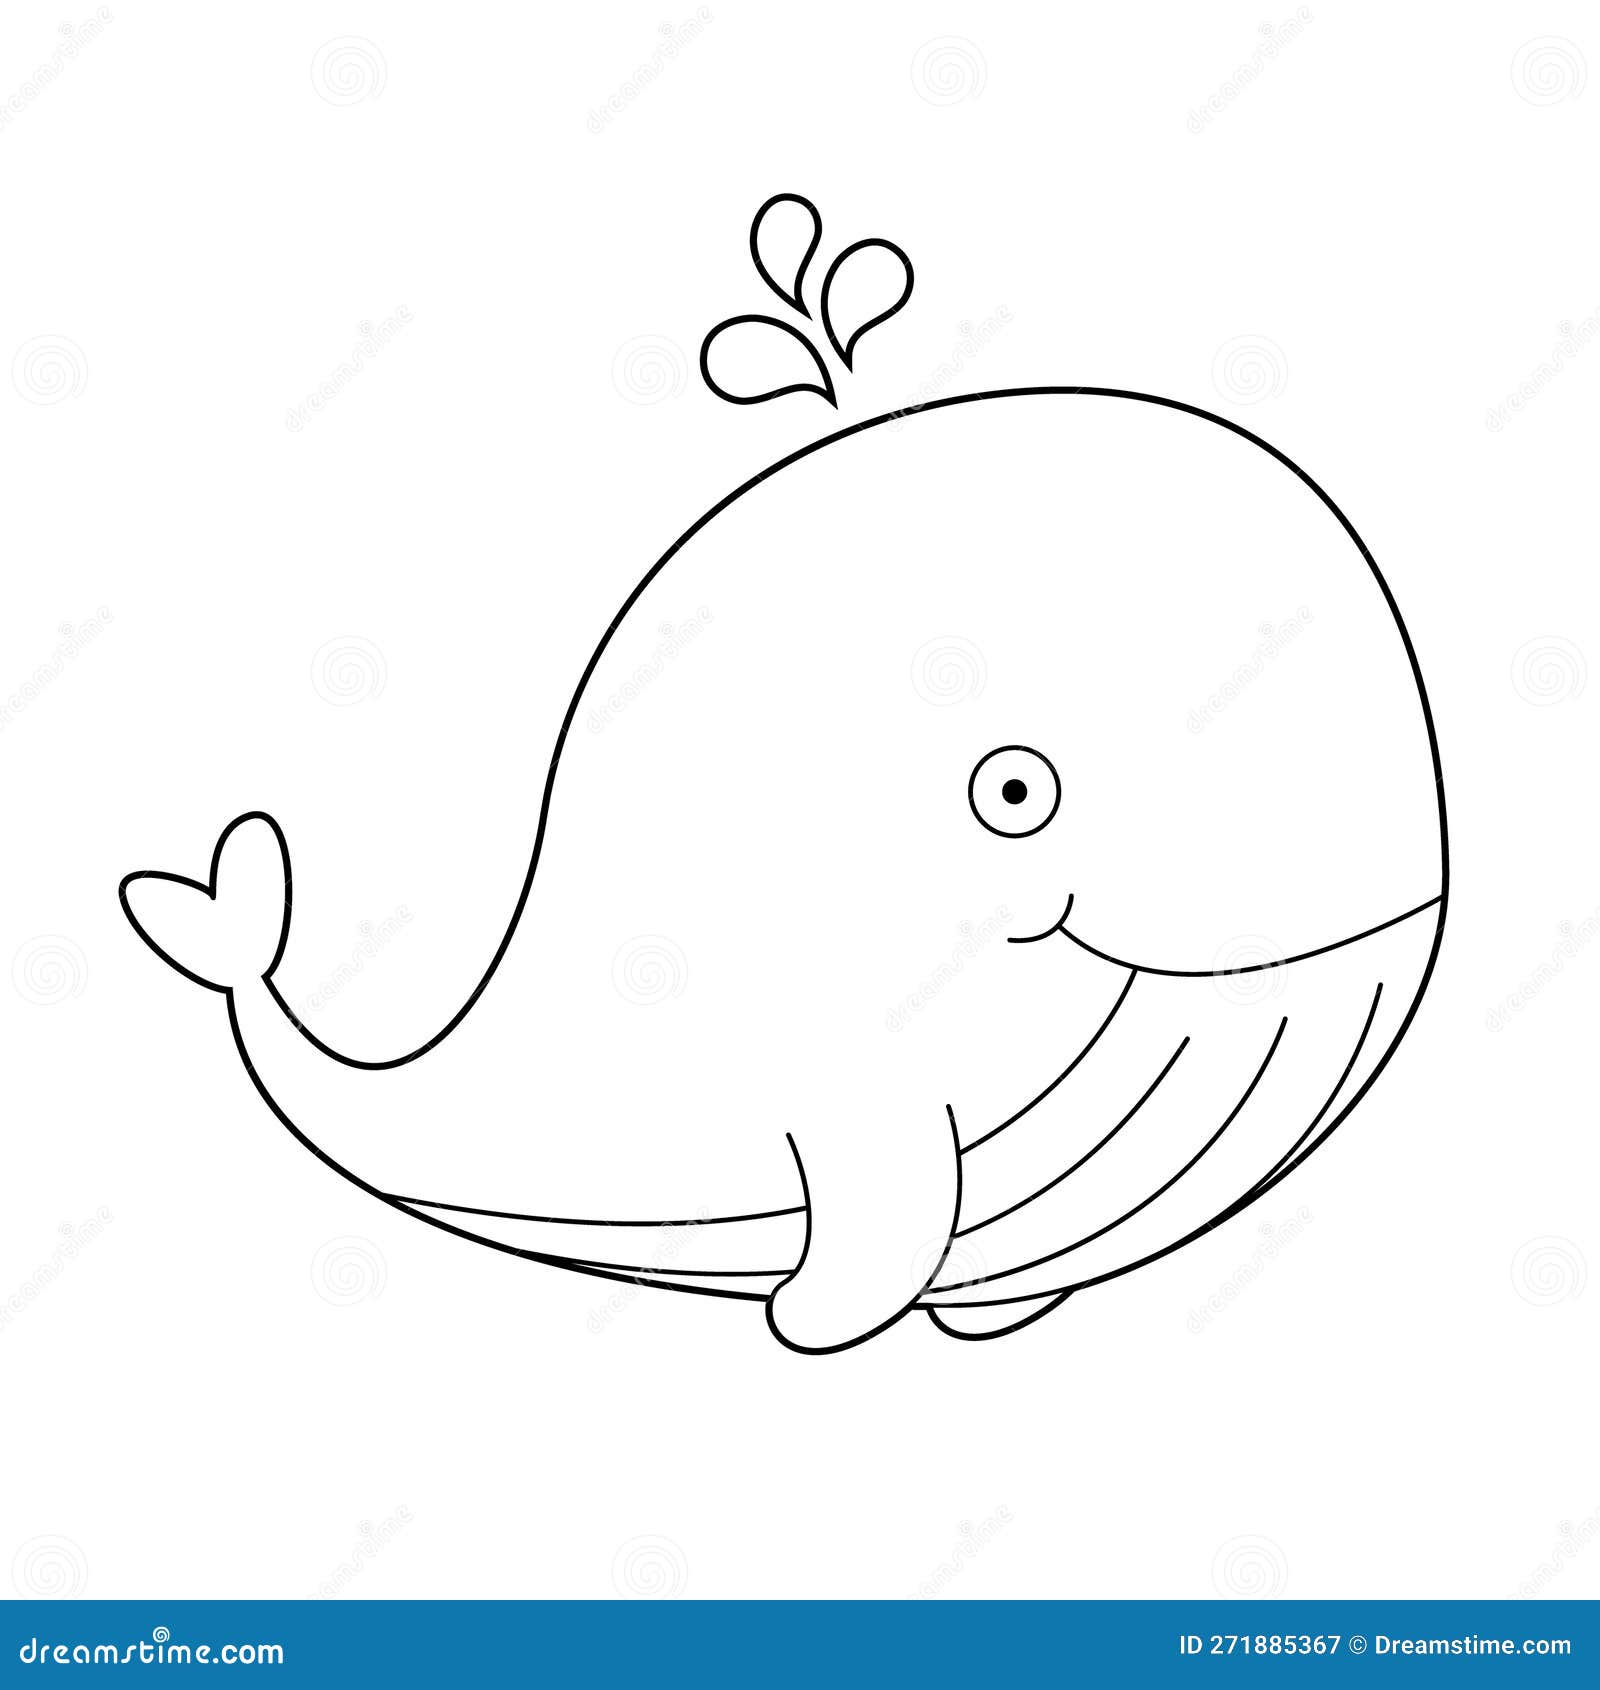 Easy Coloring Cartoon Vector Illustration of a Whale Stock Vector ...